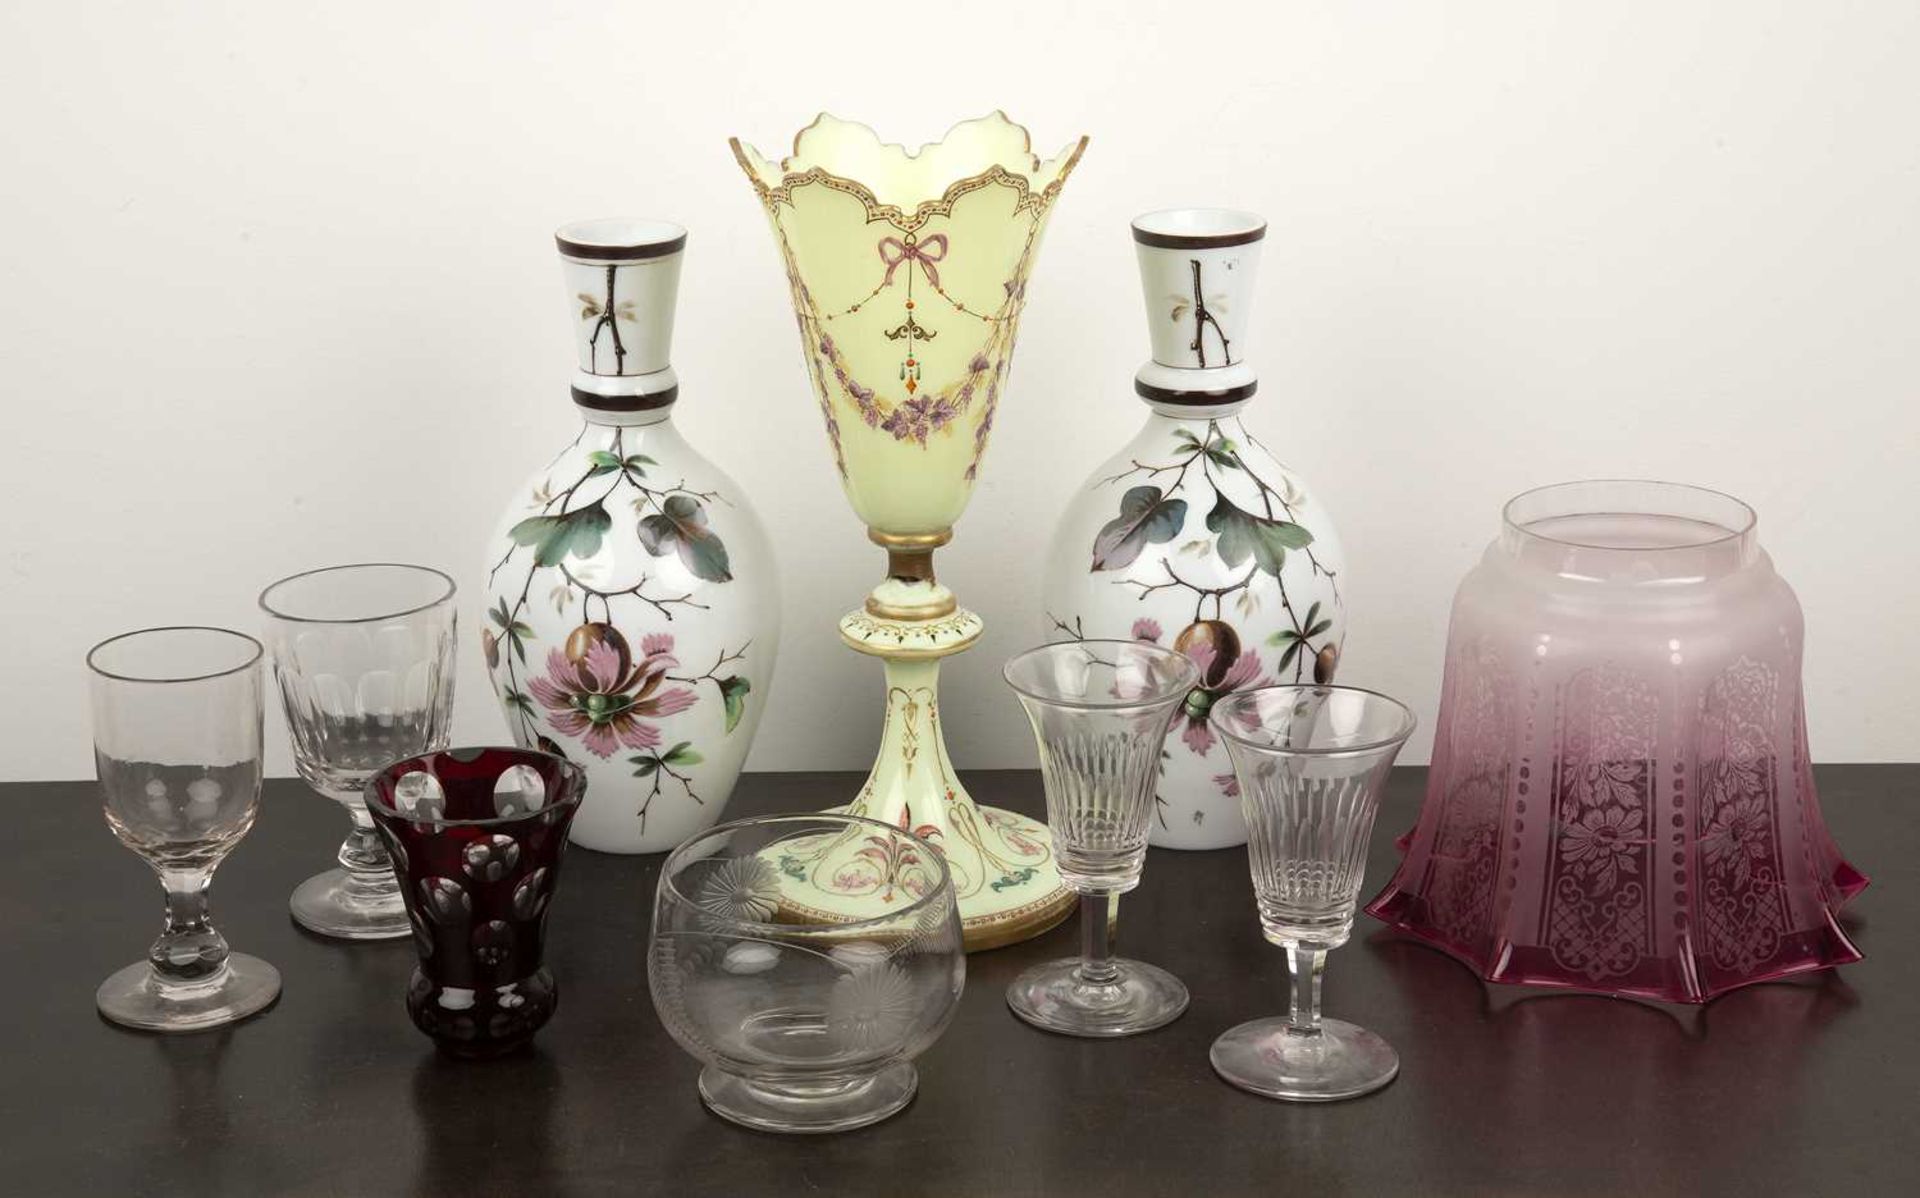 Collection of ceramics and glassware comprising of: a pair of white opaline glass vases decorated